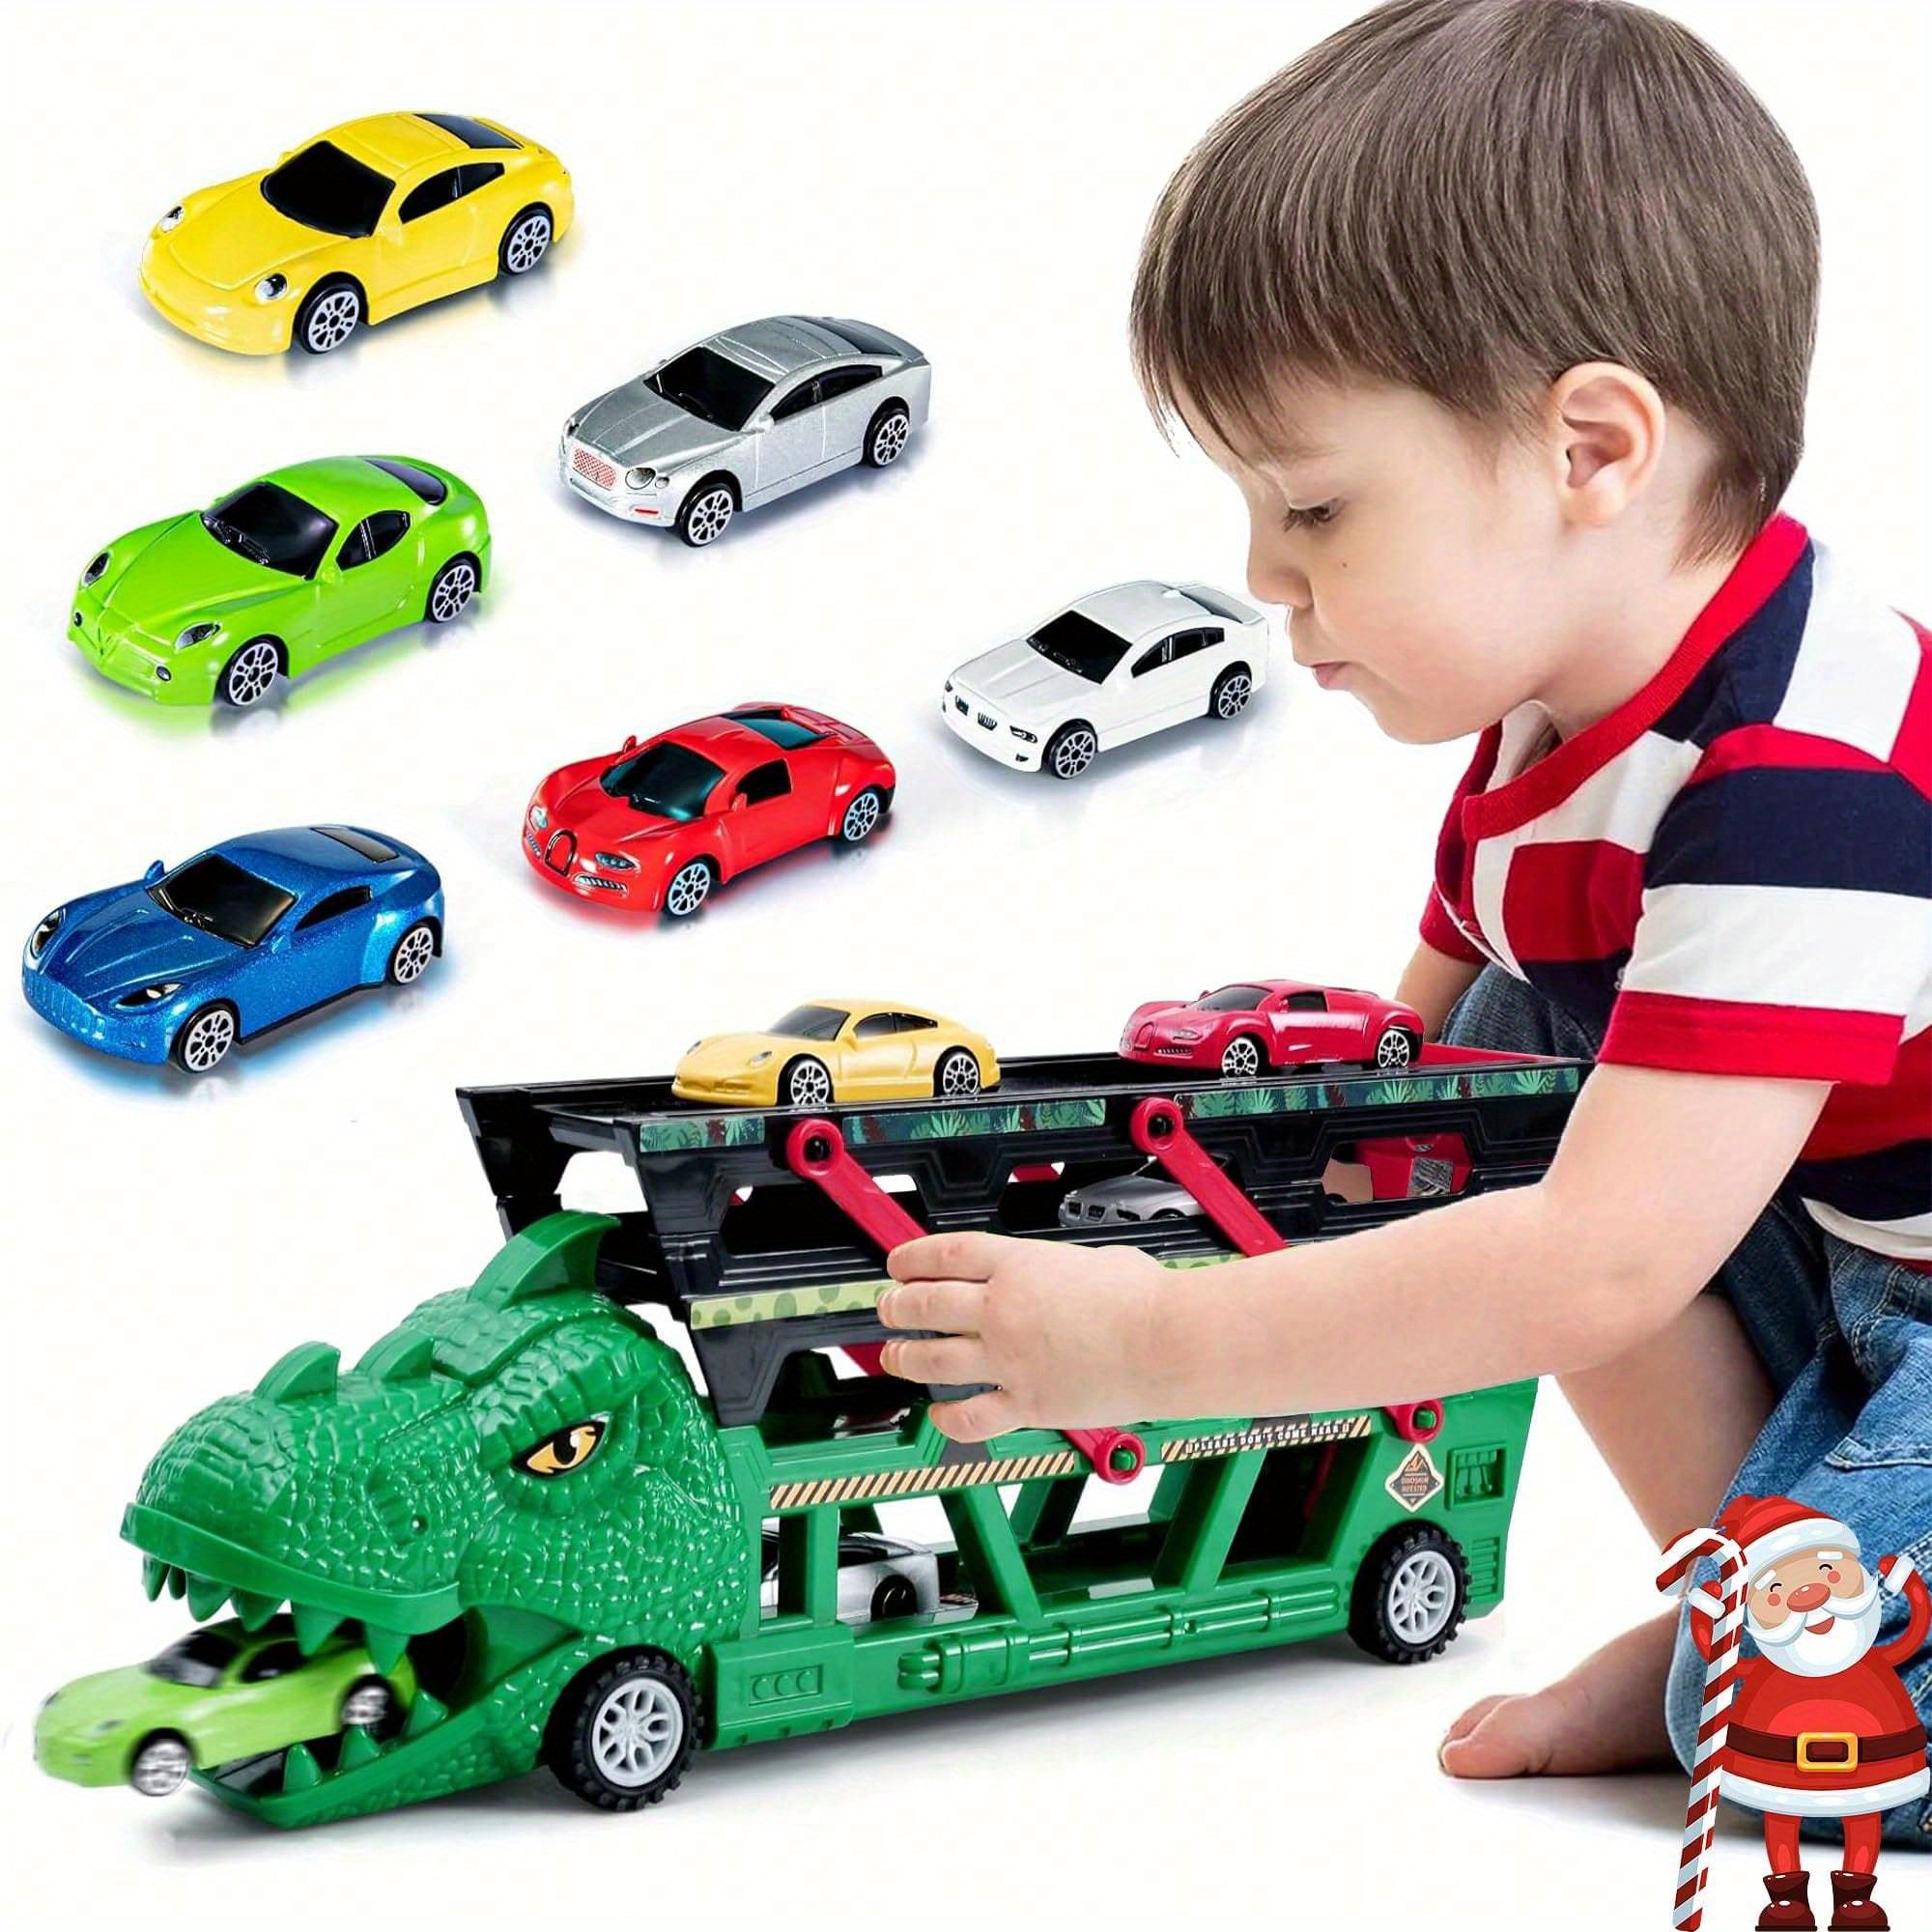 

Dinosaur Truck Toys With 6 Die-cast Alloy Race Cars For 3 4 5 6+ Years Old Boys And Girls, Dinosaur Transport Carrier Truck With 4 Expandable Levels And Launcher, Christmas Birthday Gift For Kids